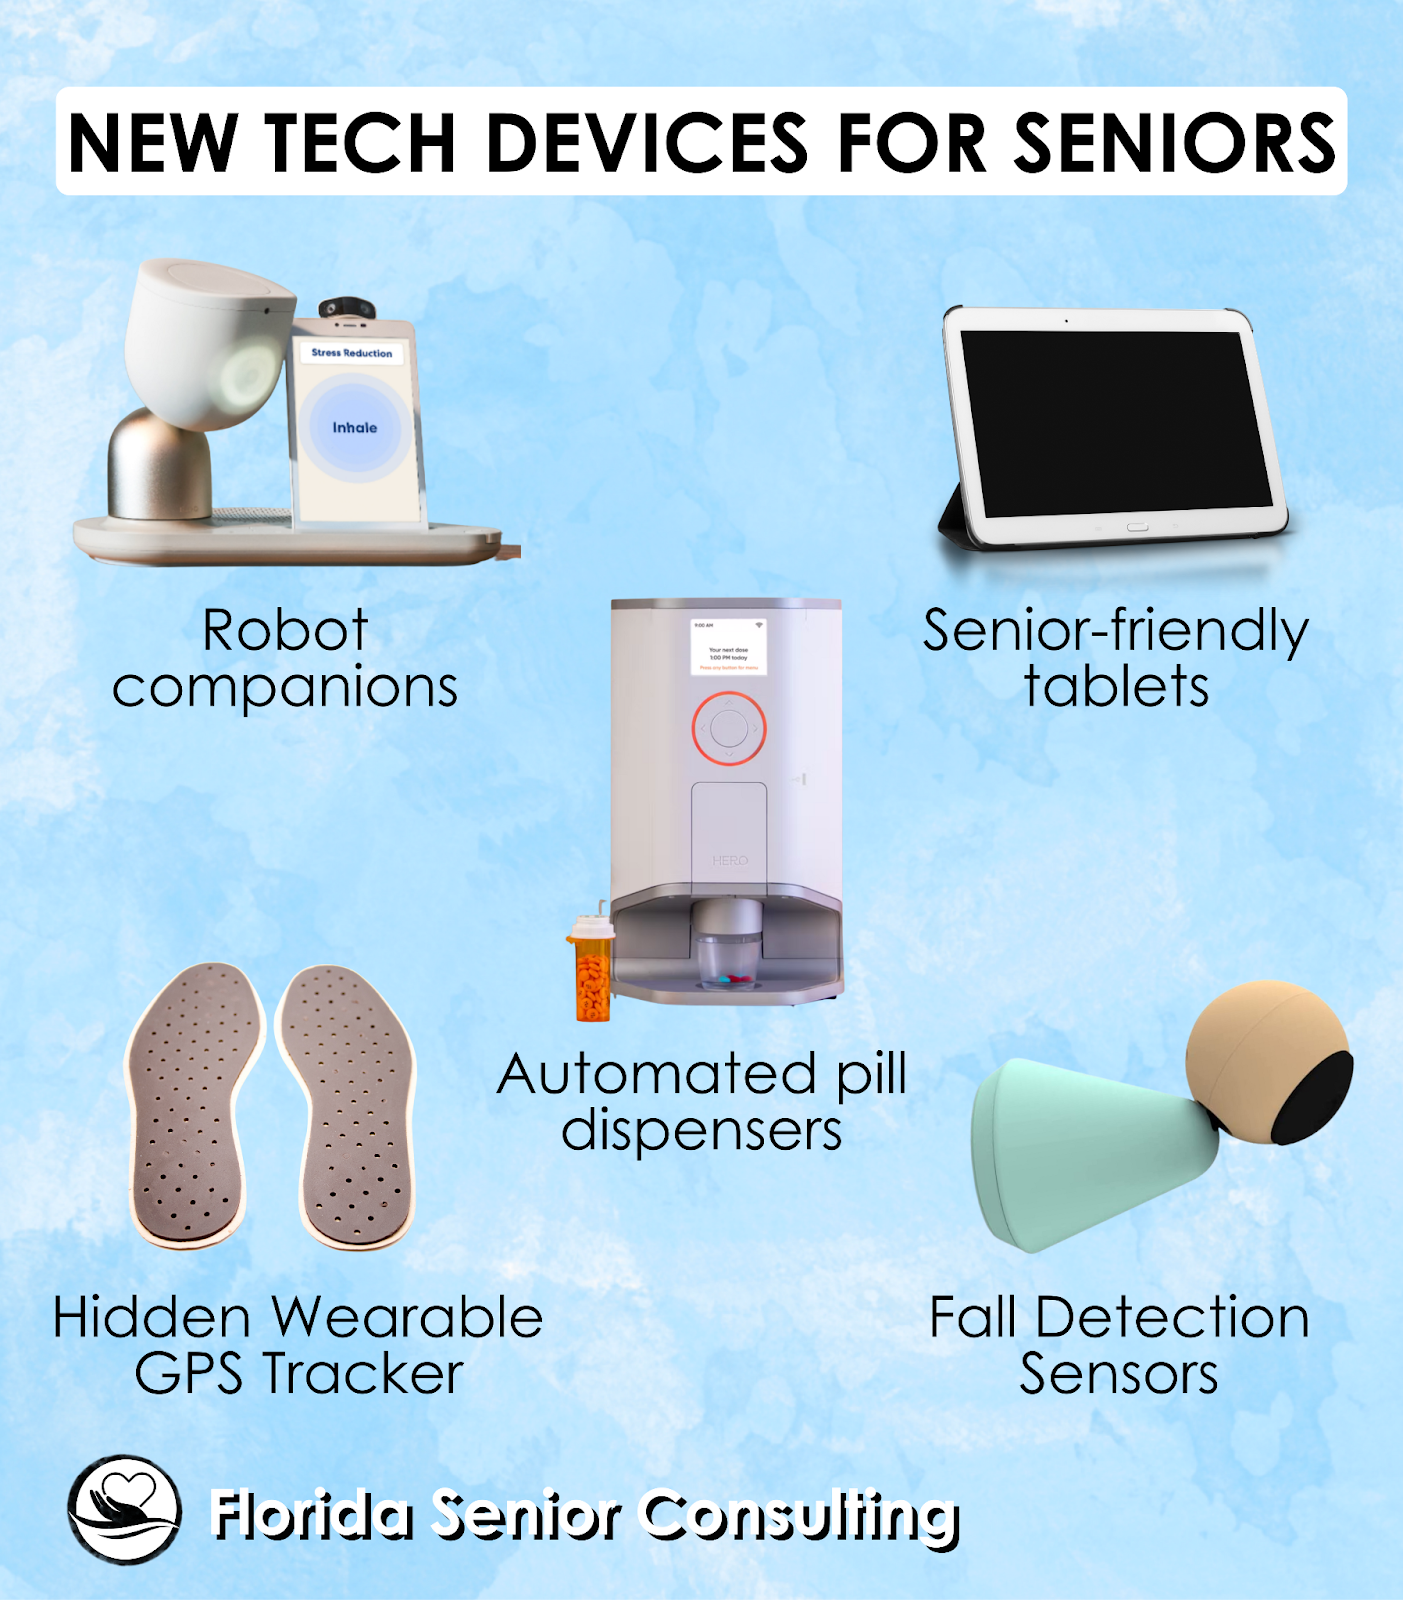 Top Five Technology-Related Gifts for Seniors